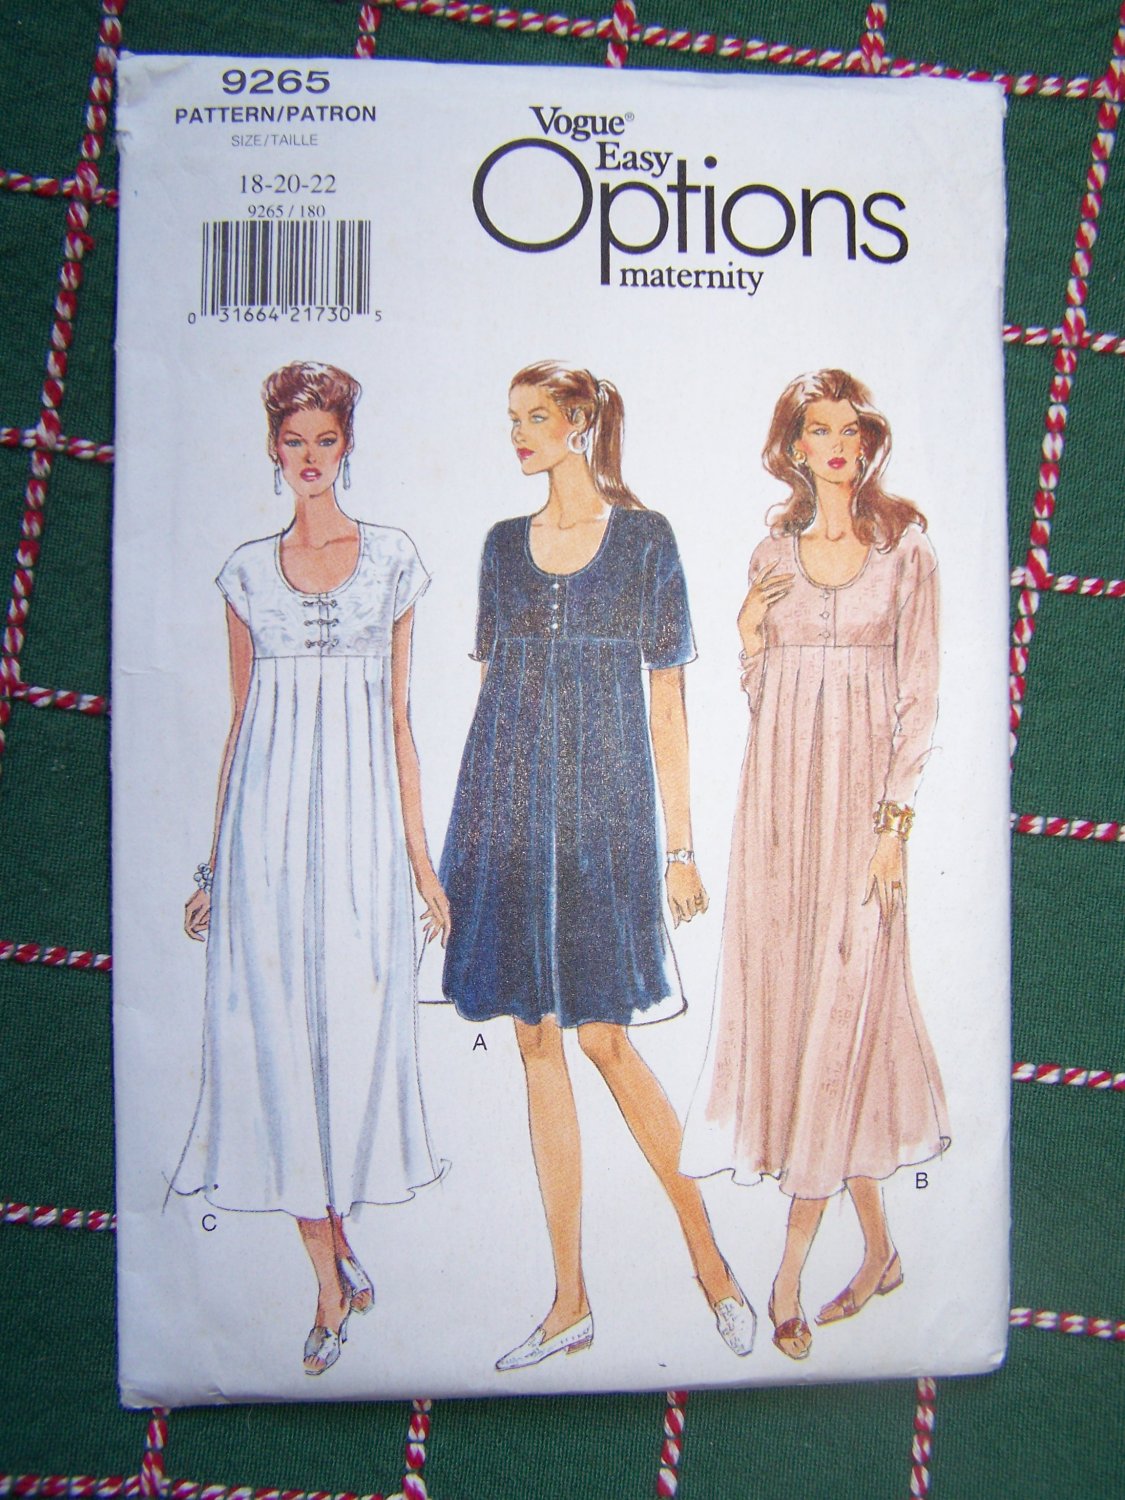 Easy Vogue Misses Maternity Dress Sewing Pattern 9265 Plus Size 18 20 22